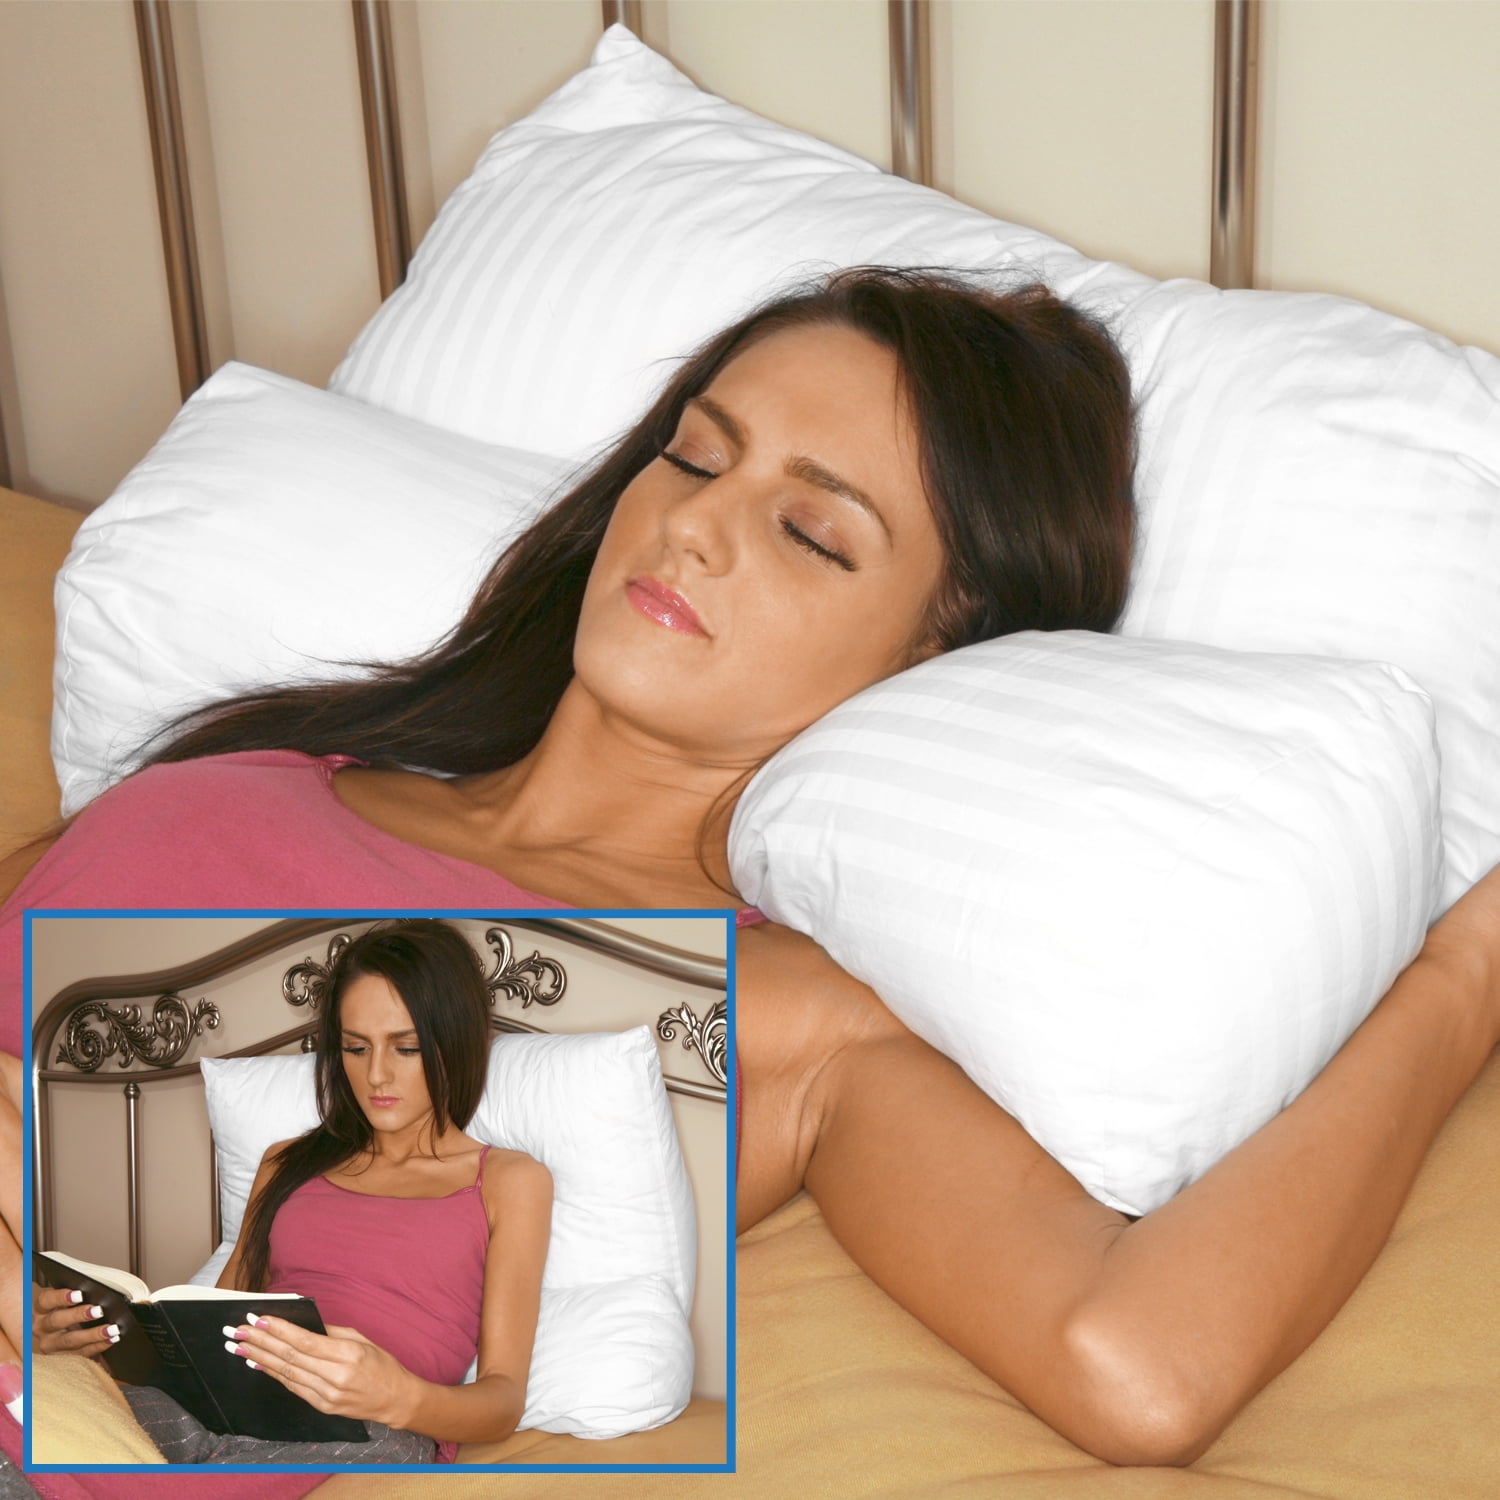 LUXELIFT Adjustable Support Therapy Bed Wedge Pillow 12ʺ